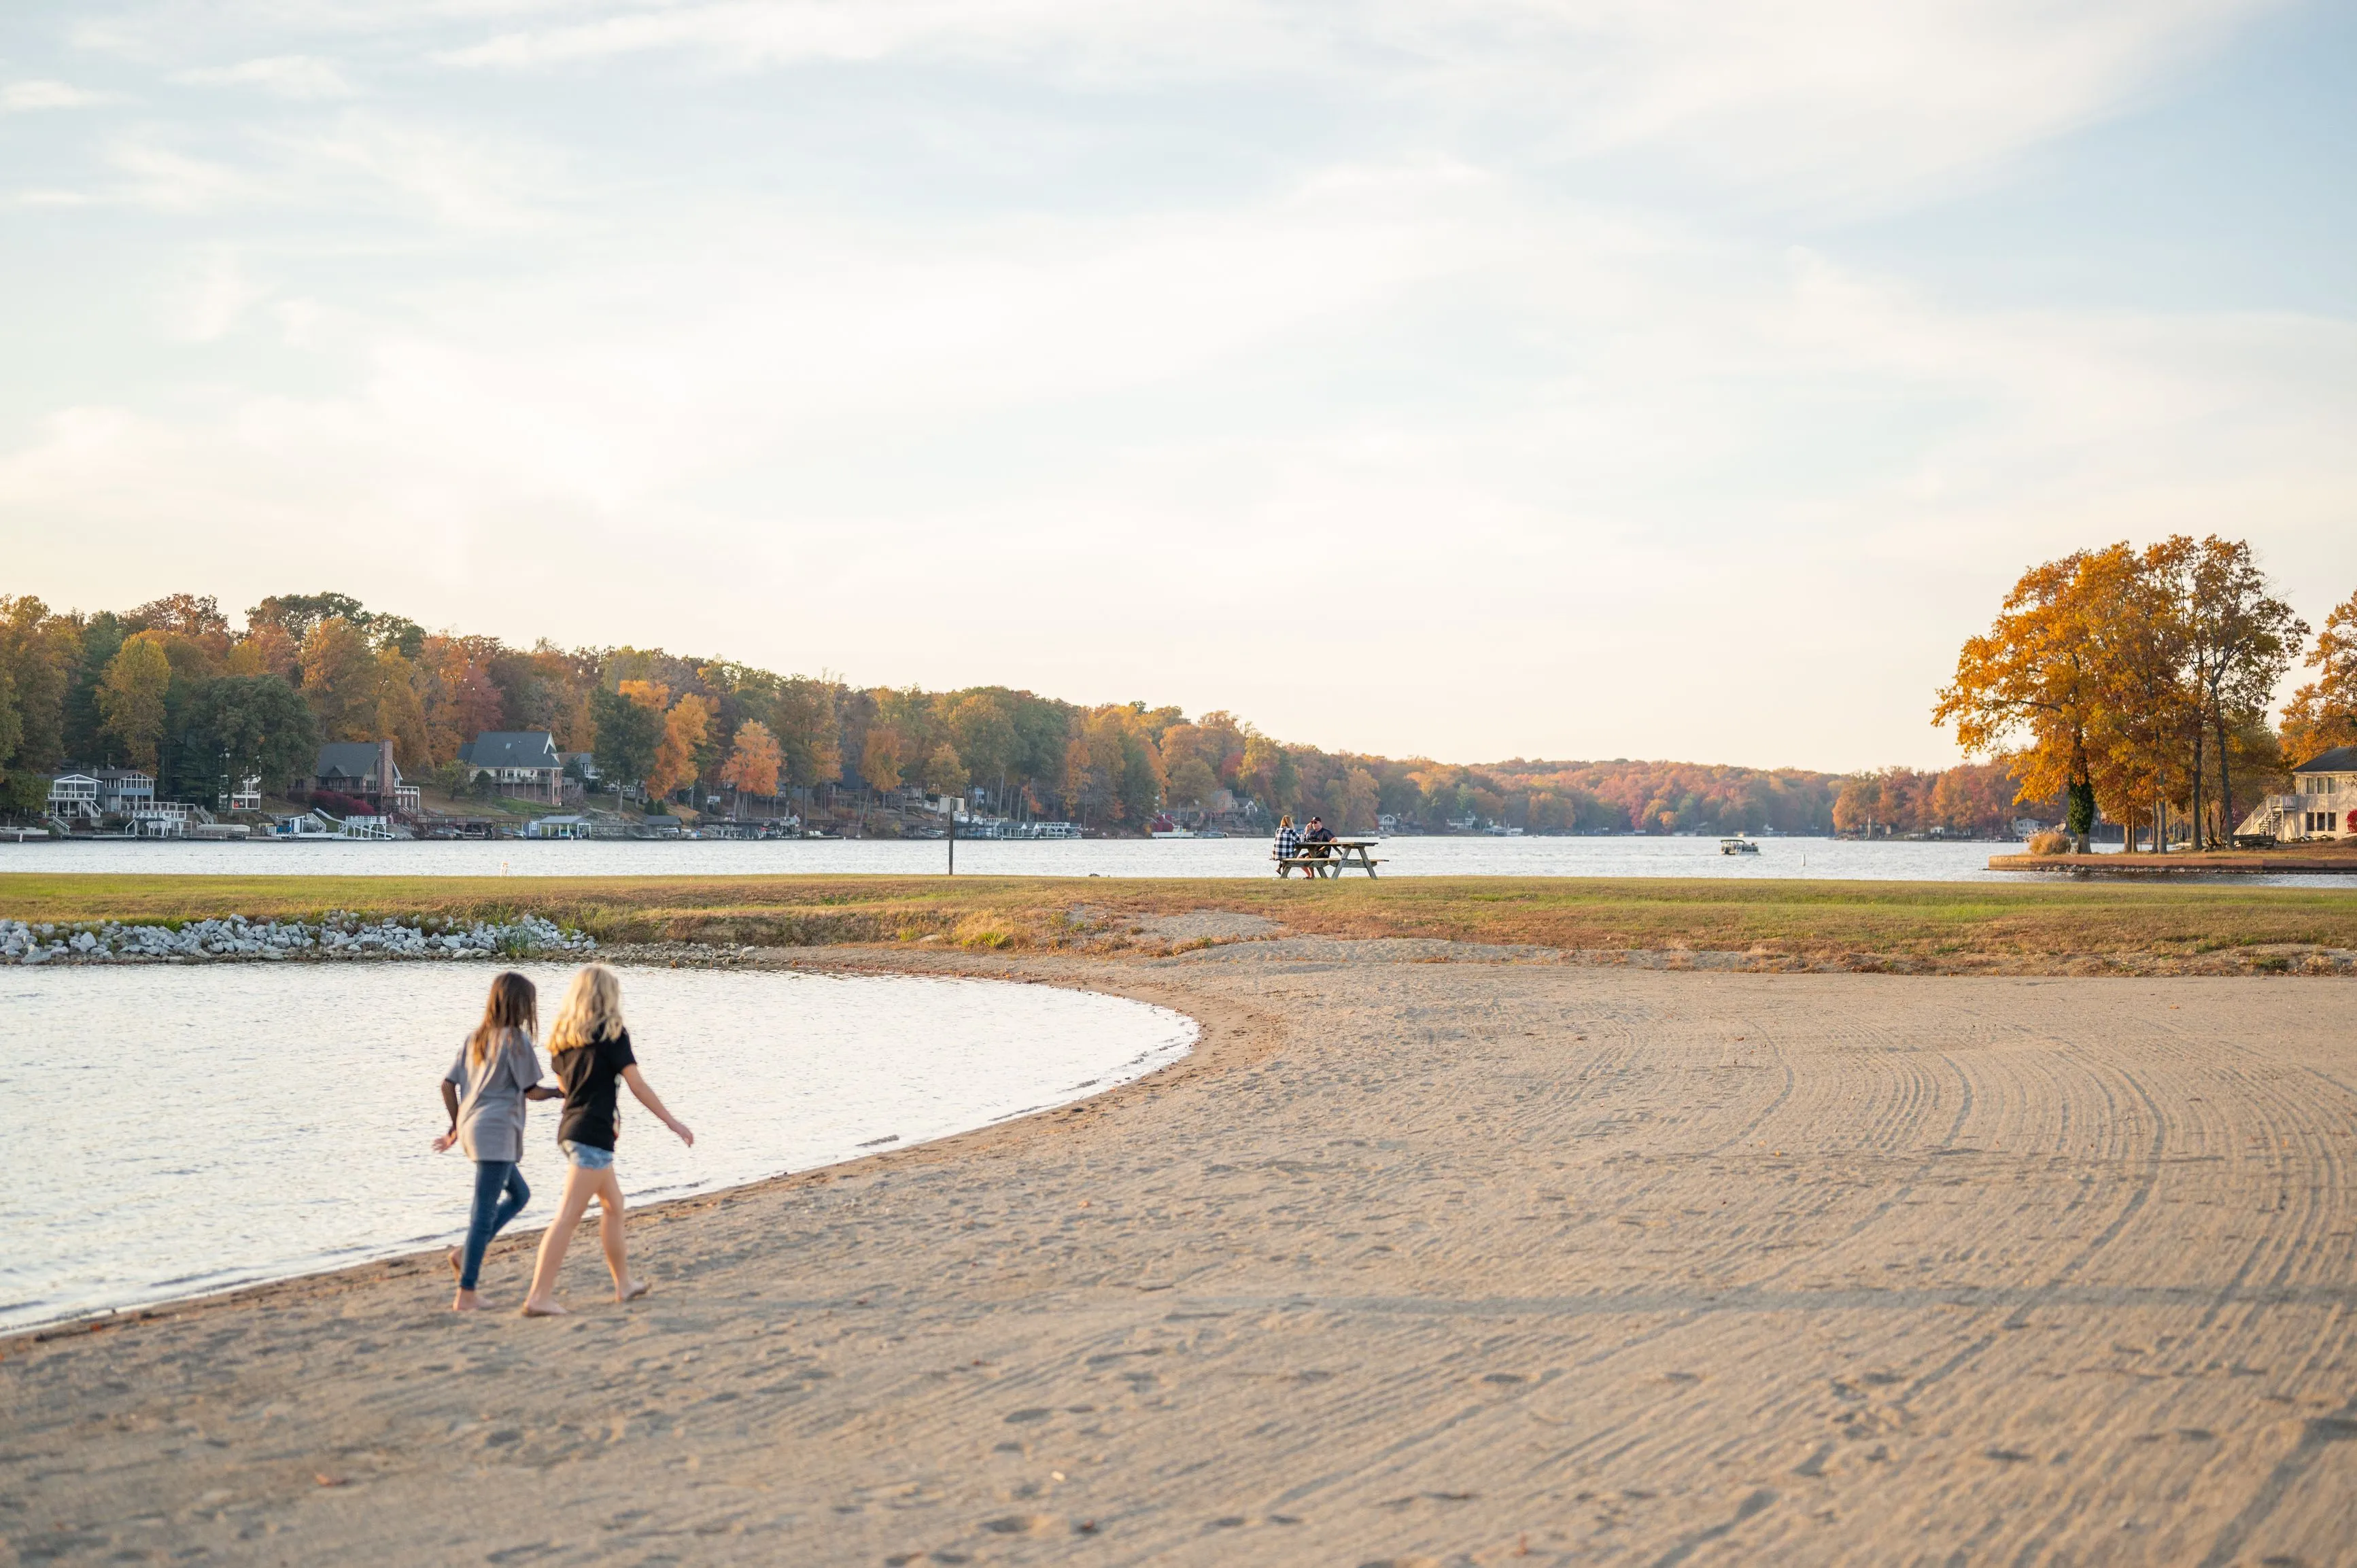 Two individuals walking on a sandy beach with trees and a lake in the background during autumn.